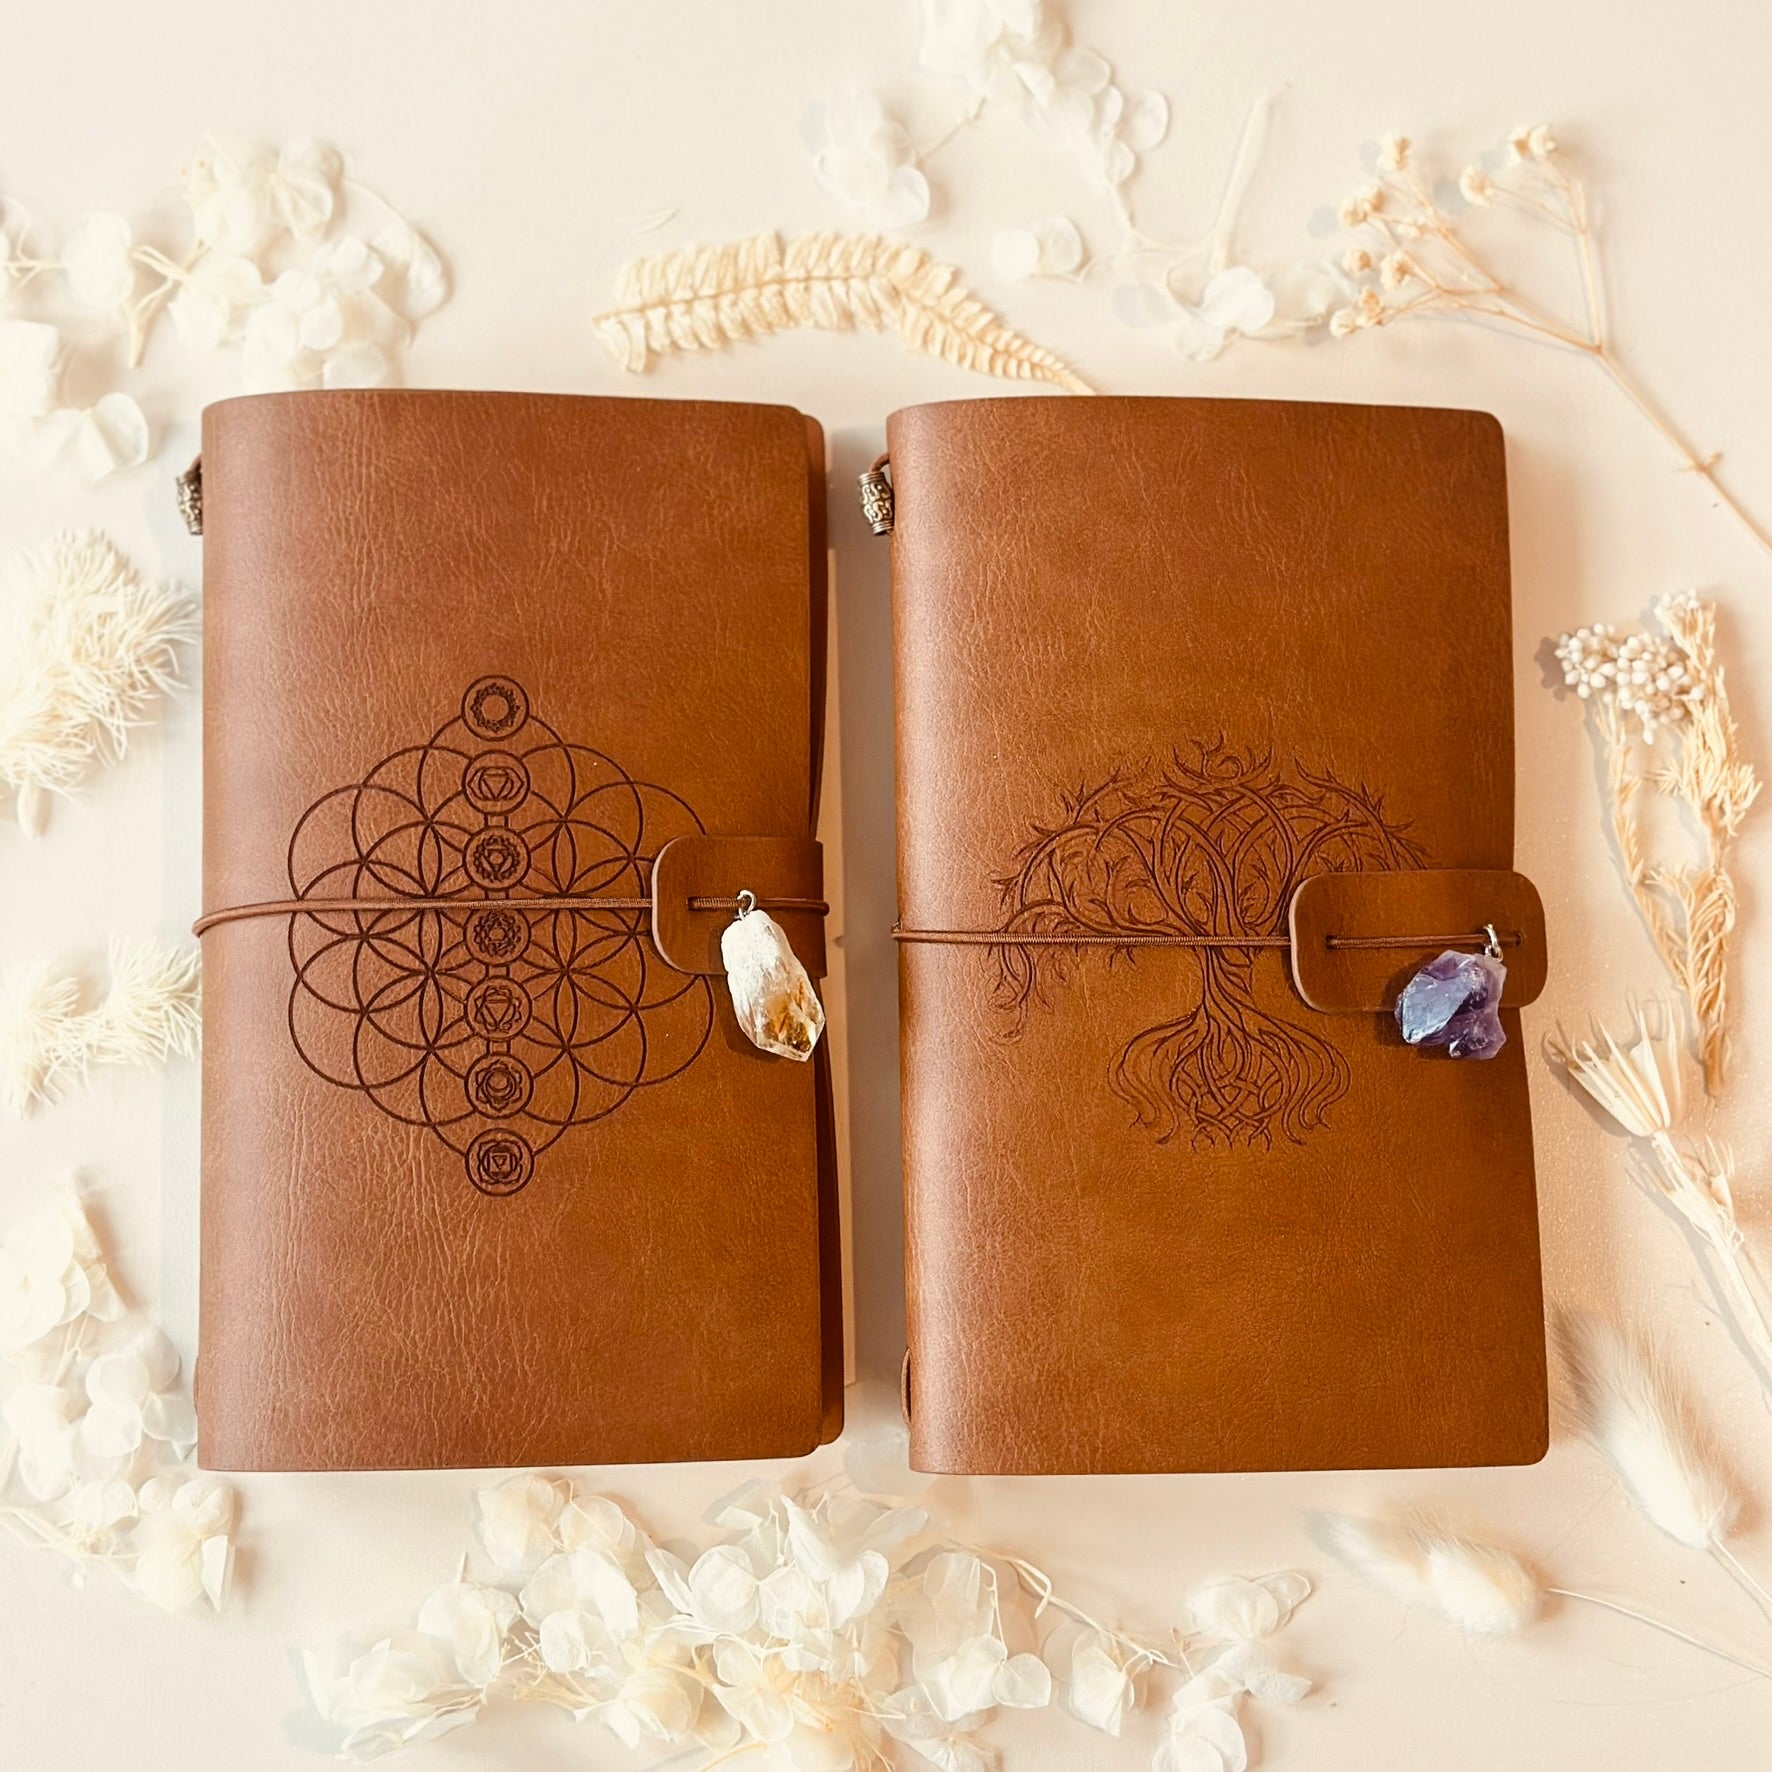 Chakra and Tree of Life Crystal Charm Manifestation Leather Journals